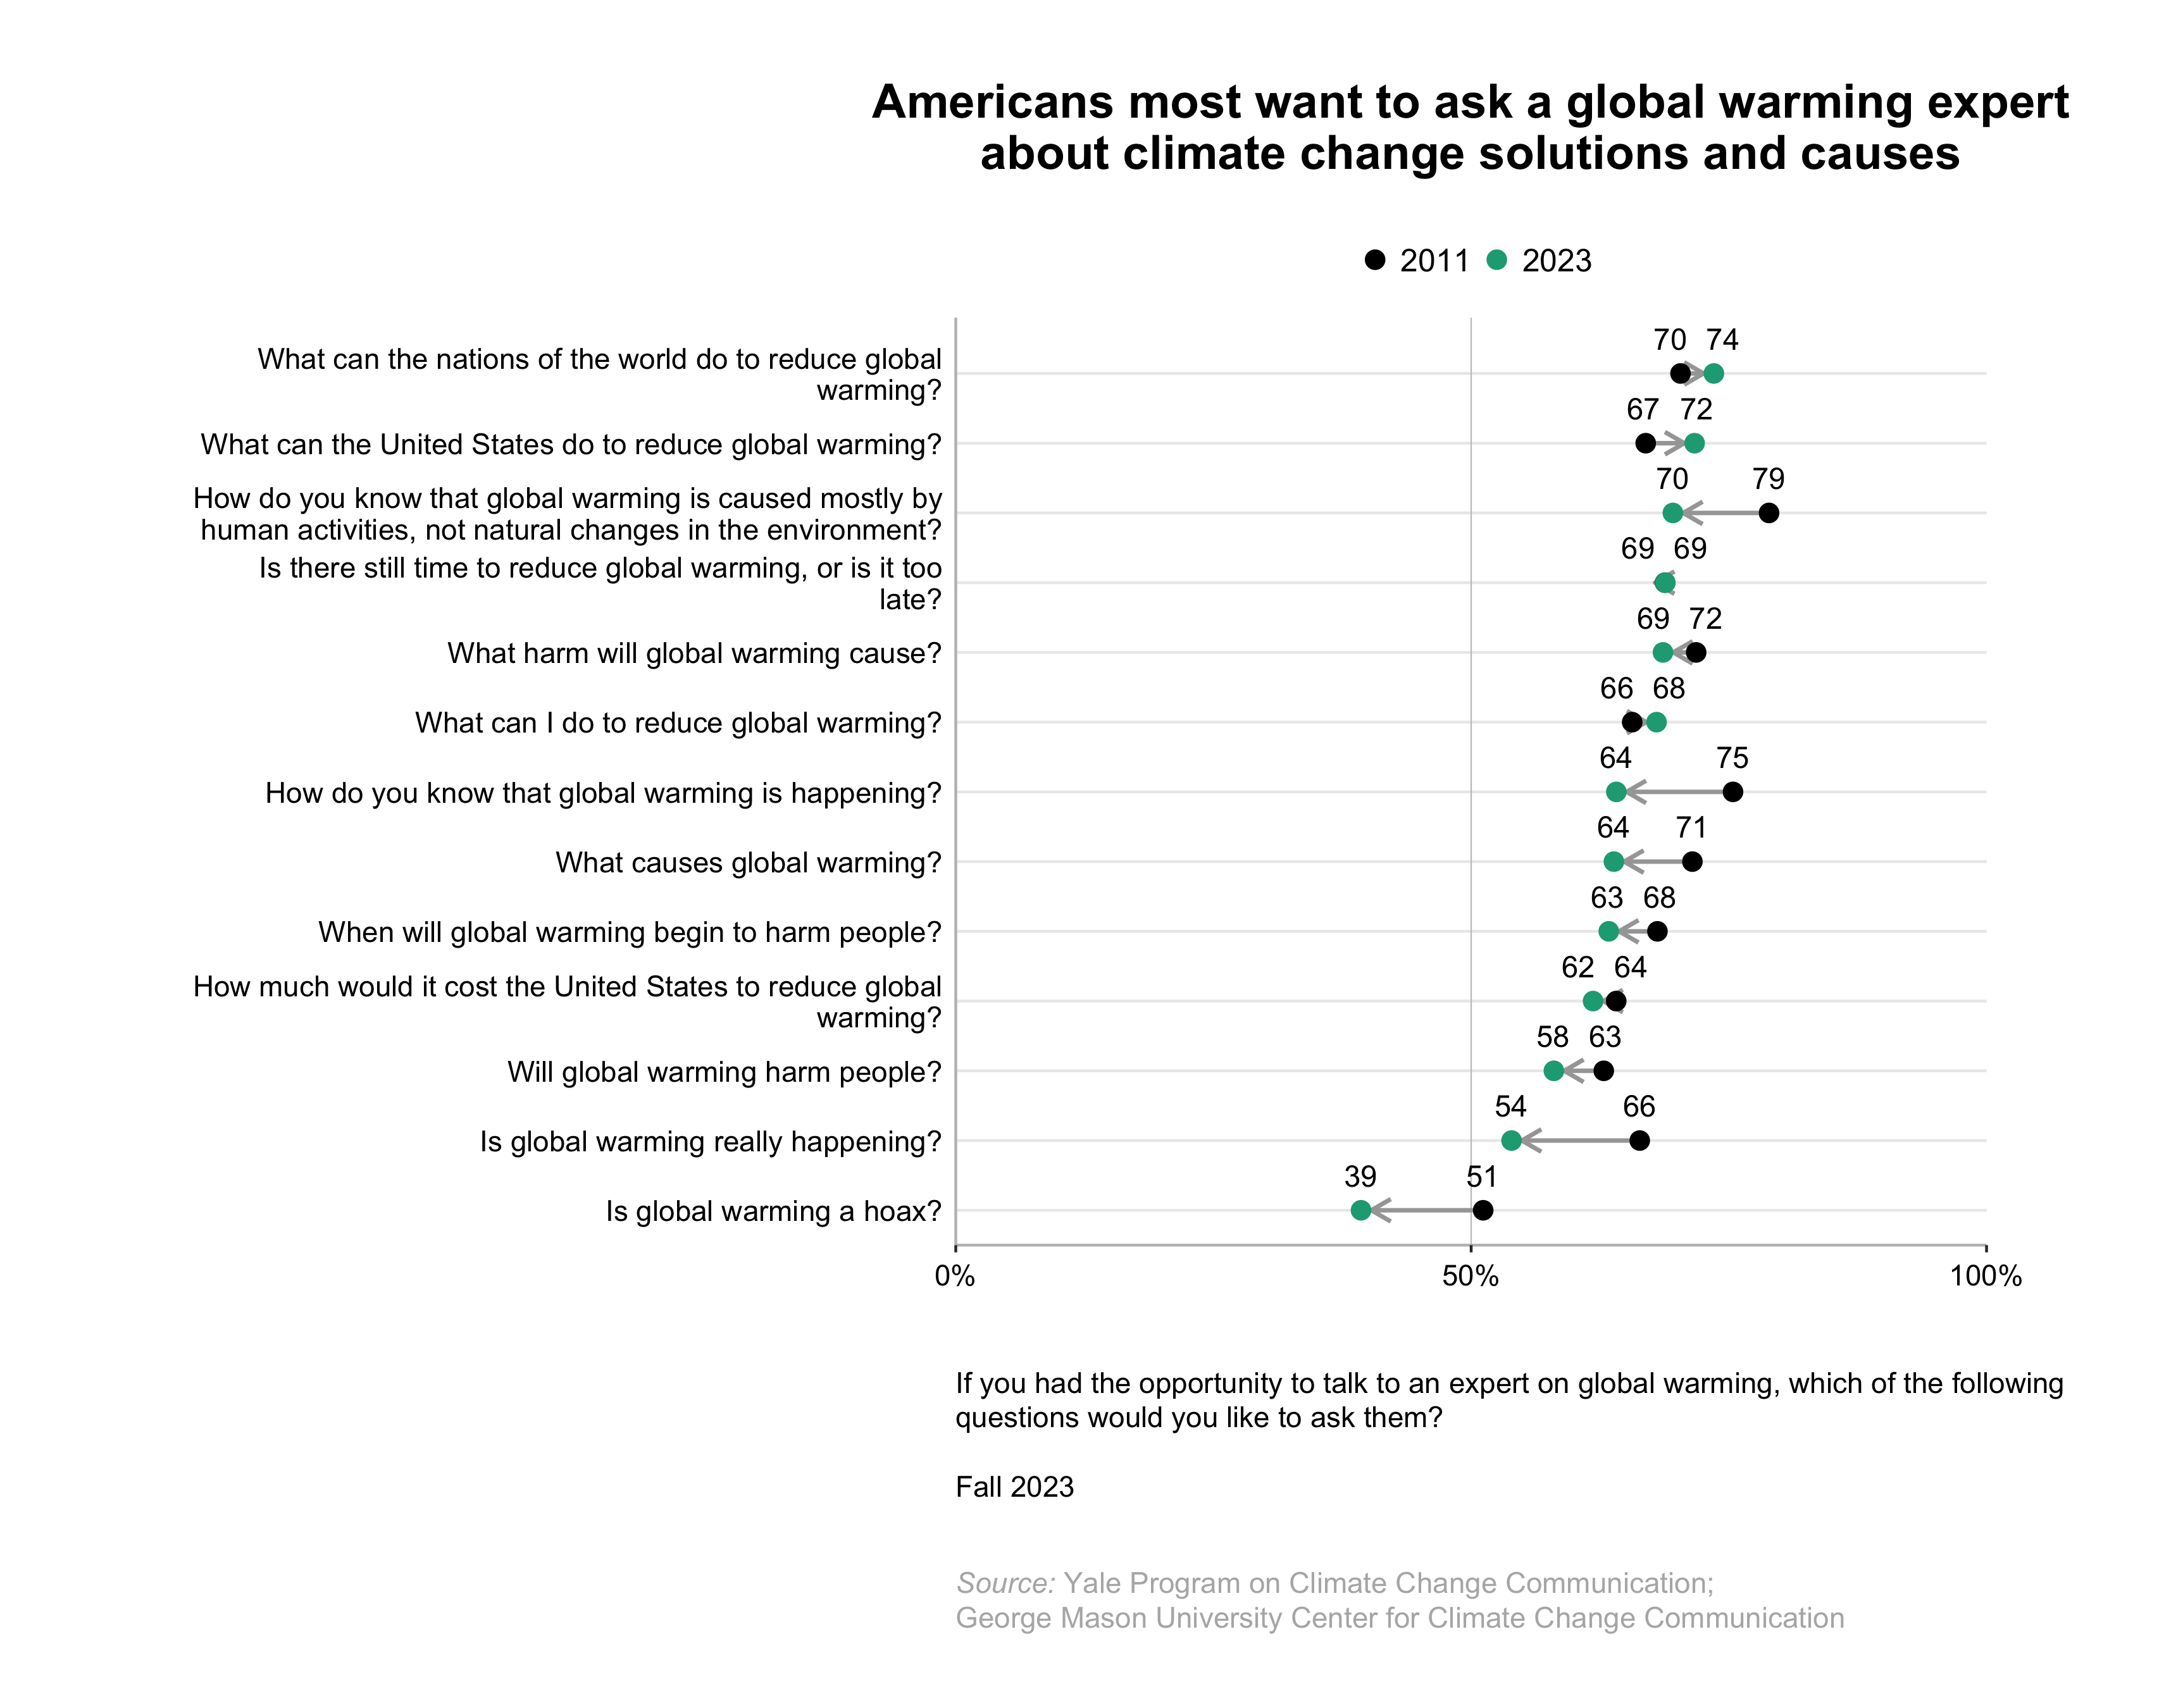 These dot plots show the change in the percentage of Americans from 2011 to 2023 who want to ask a global warming expert each specific question about global warming. Questions include "Is global warming really happening?", "How do you know that global warming is happening?", "What causes global warming?", "How do you know that global warming is caused mostly by human activities, not natural changes in the environment?", "What harm will global warming cause?", "Will global warming harm people?", "When will global warming begin to harm people?", "What can the United States do to reduce global warming?", "What can I do to reduce global warming?", "How much would it cost the United States to reduce global warming?", "What can the nations of the world do to reduce global warming?", "Is there still time to reduce global warming, or is it too late?", and "Is global warming a hoax?". Americans most want to ask a global warming expert about climate change solutions and causes. Data: Climate Change in the American Mind, Fall 2023. Refer to the data tables in Appendix 1 of the report for all percentages.